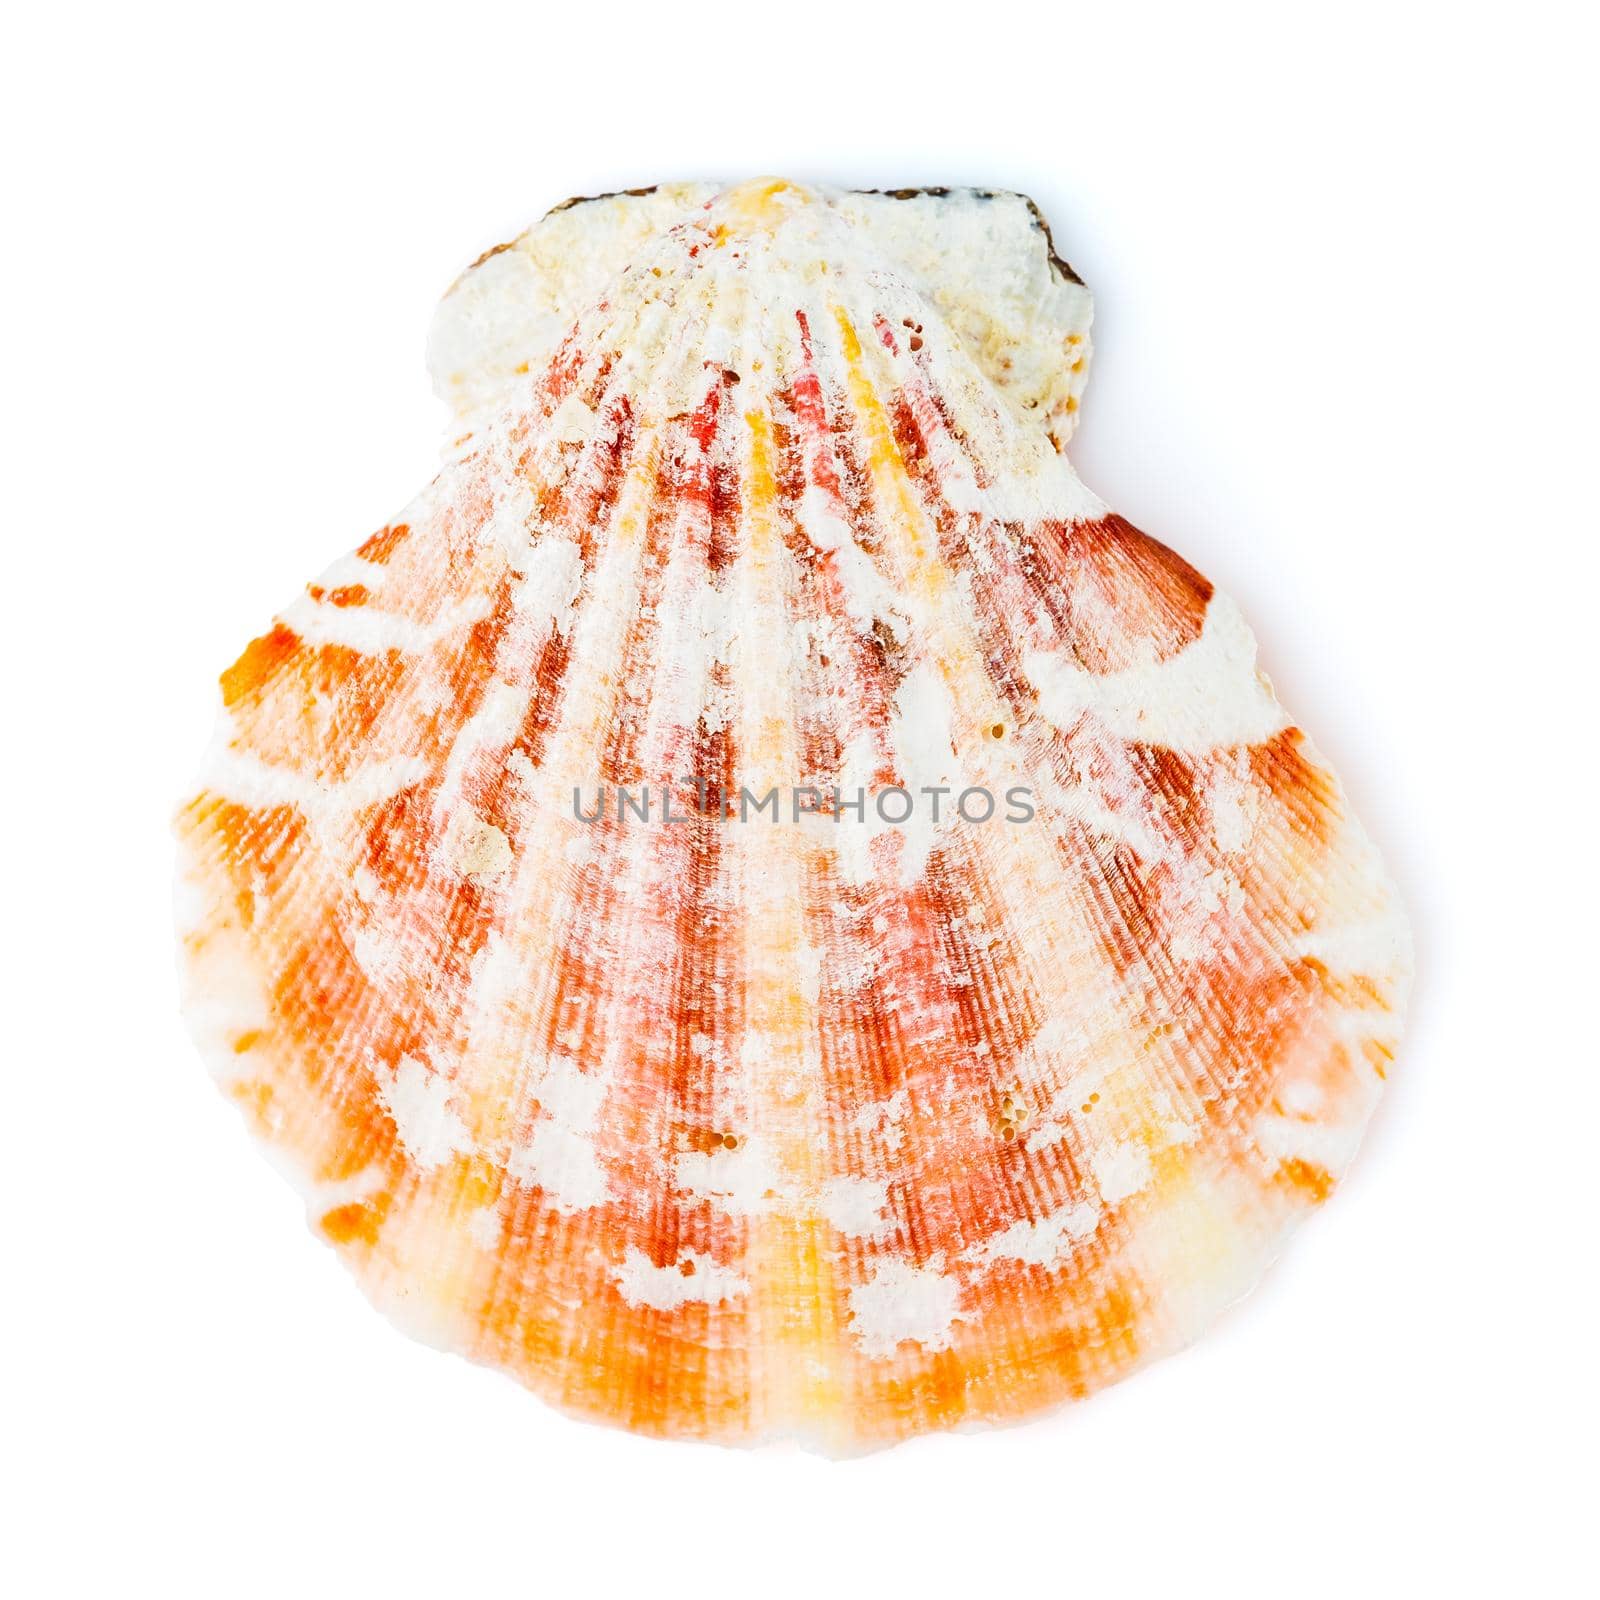 Red Cockleshell Sea Shell isolated on white background